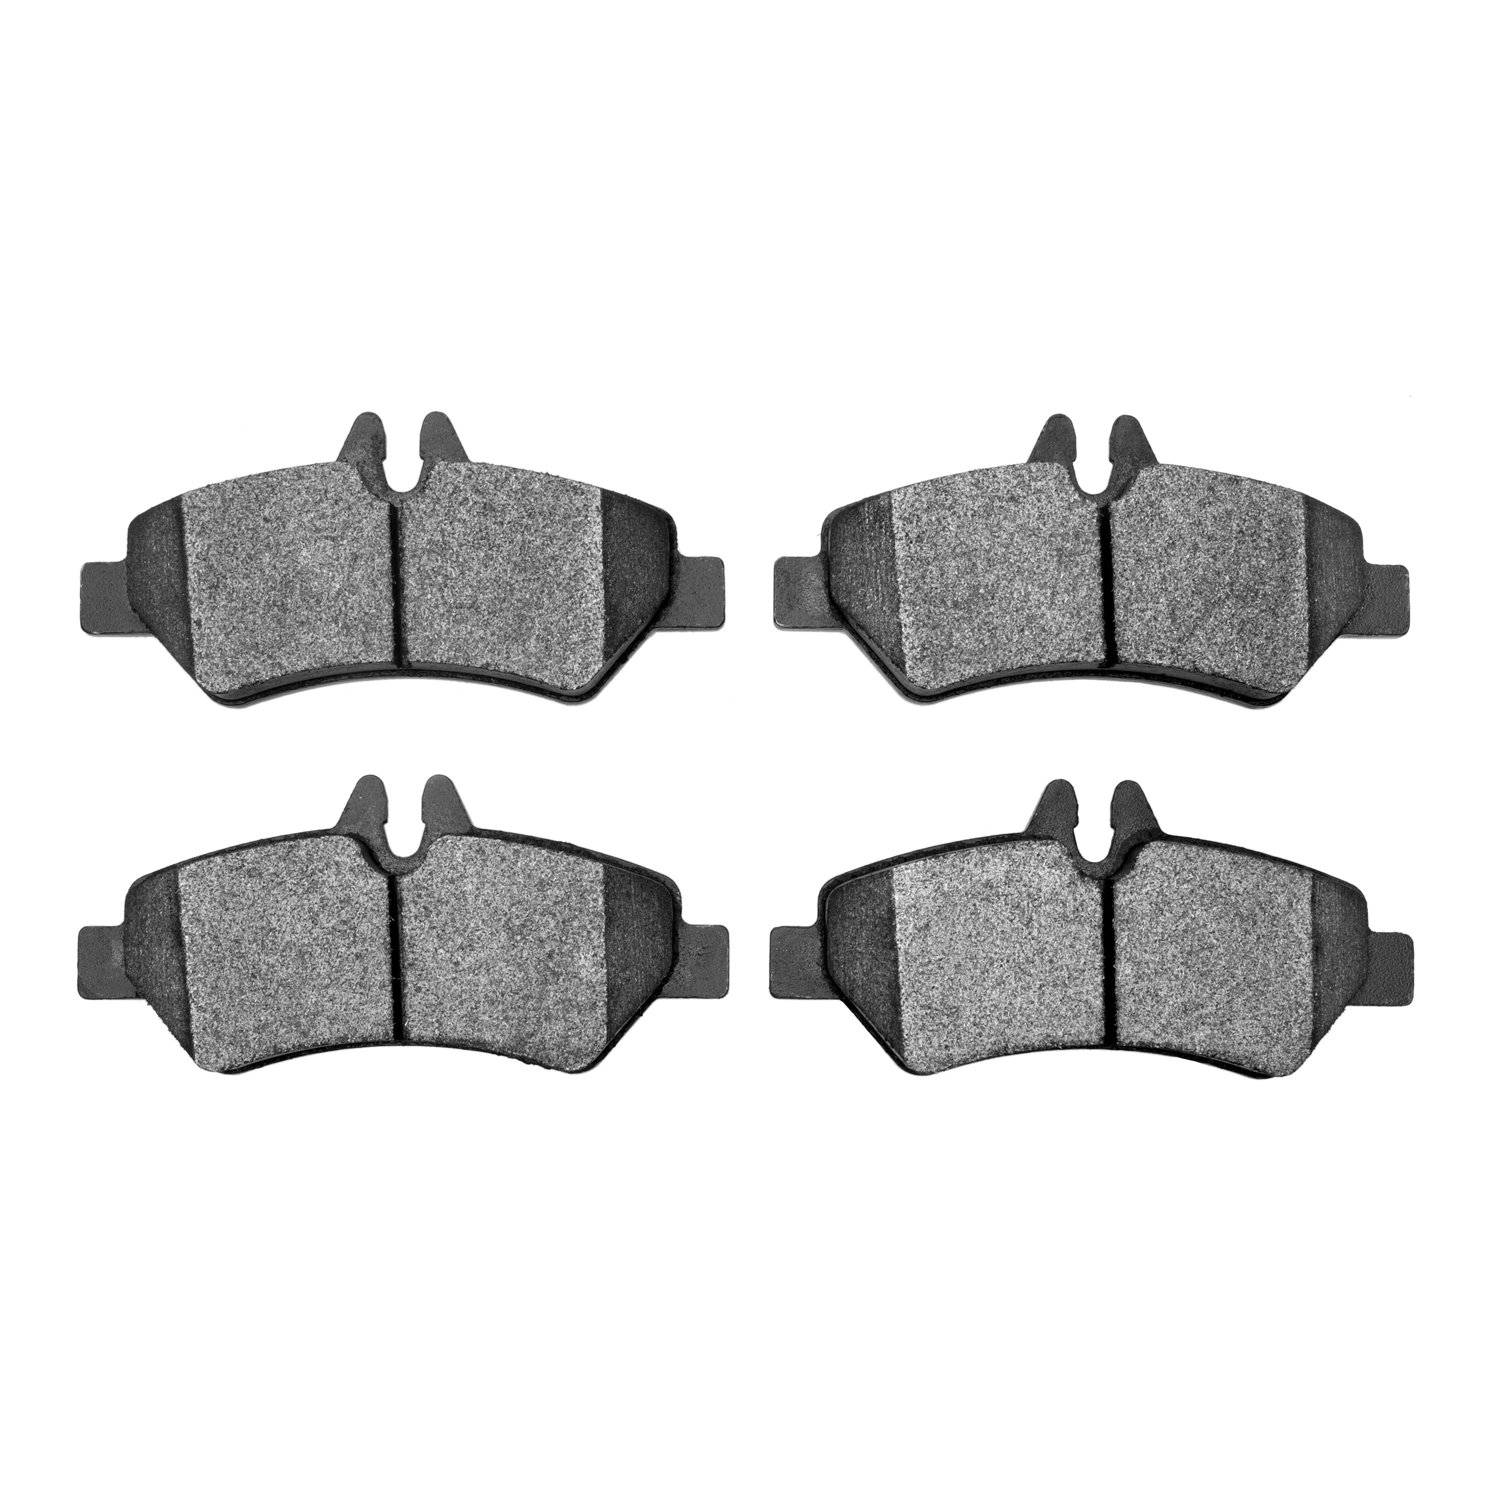 Optimum OE Brake Pads, 2006-2018 Fits Multiple Makes/Models, Position: Rear Right